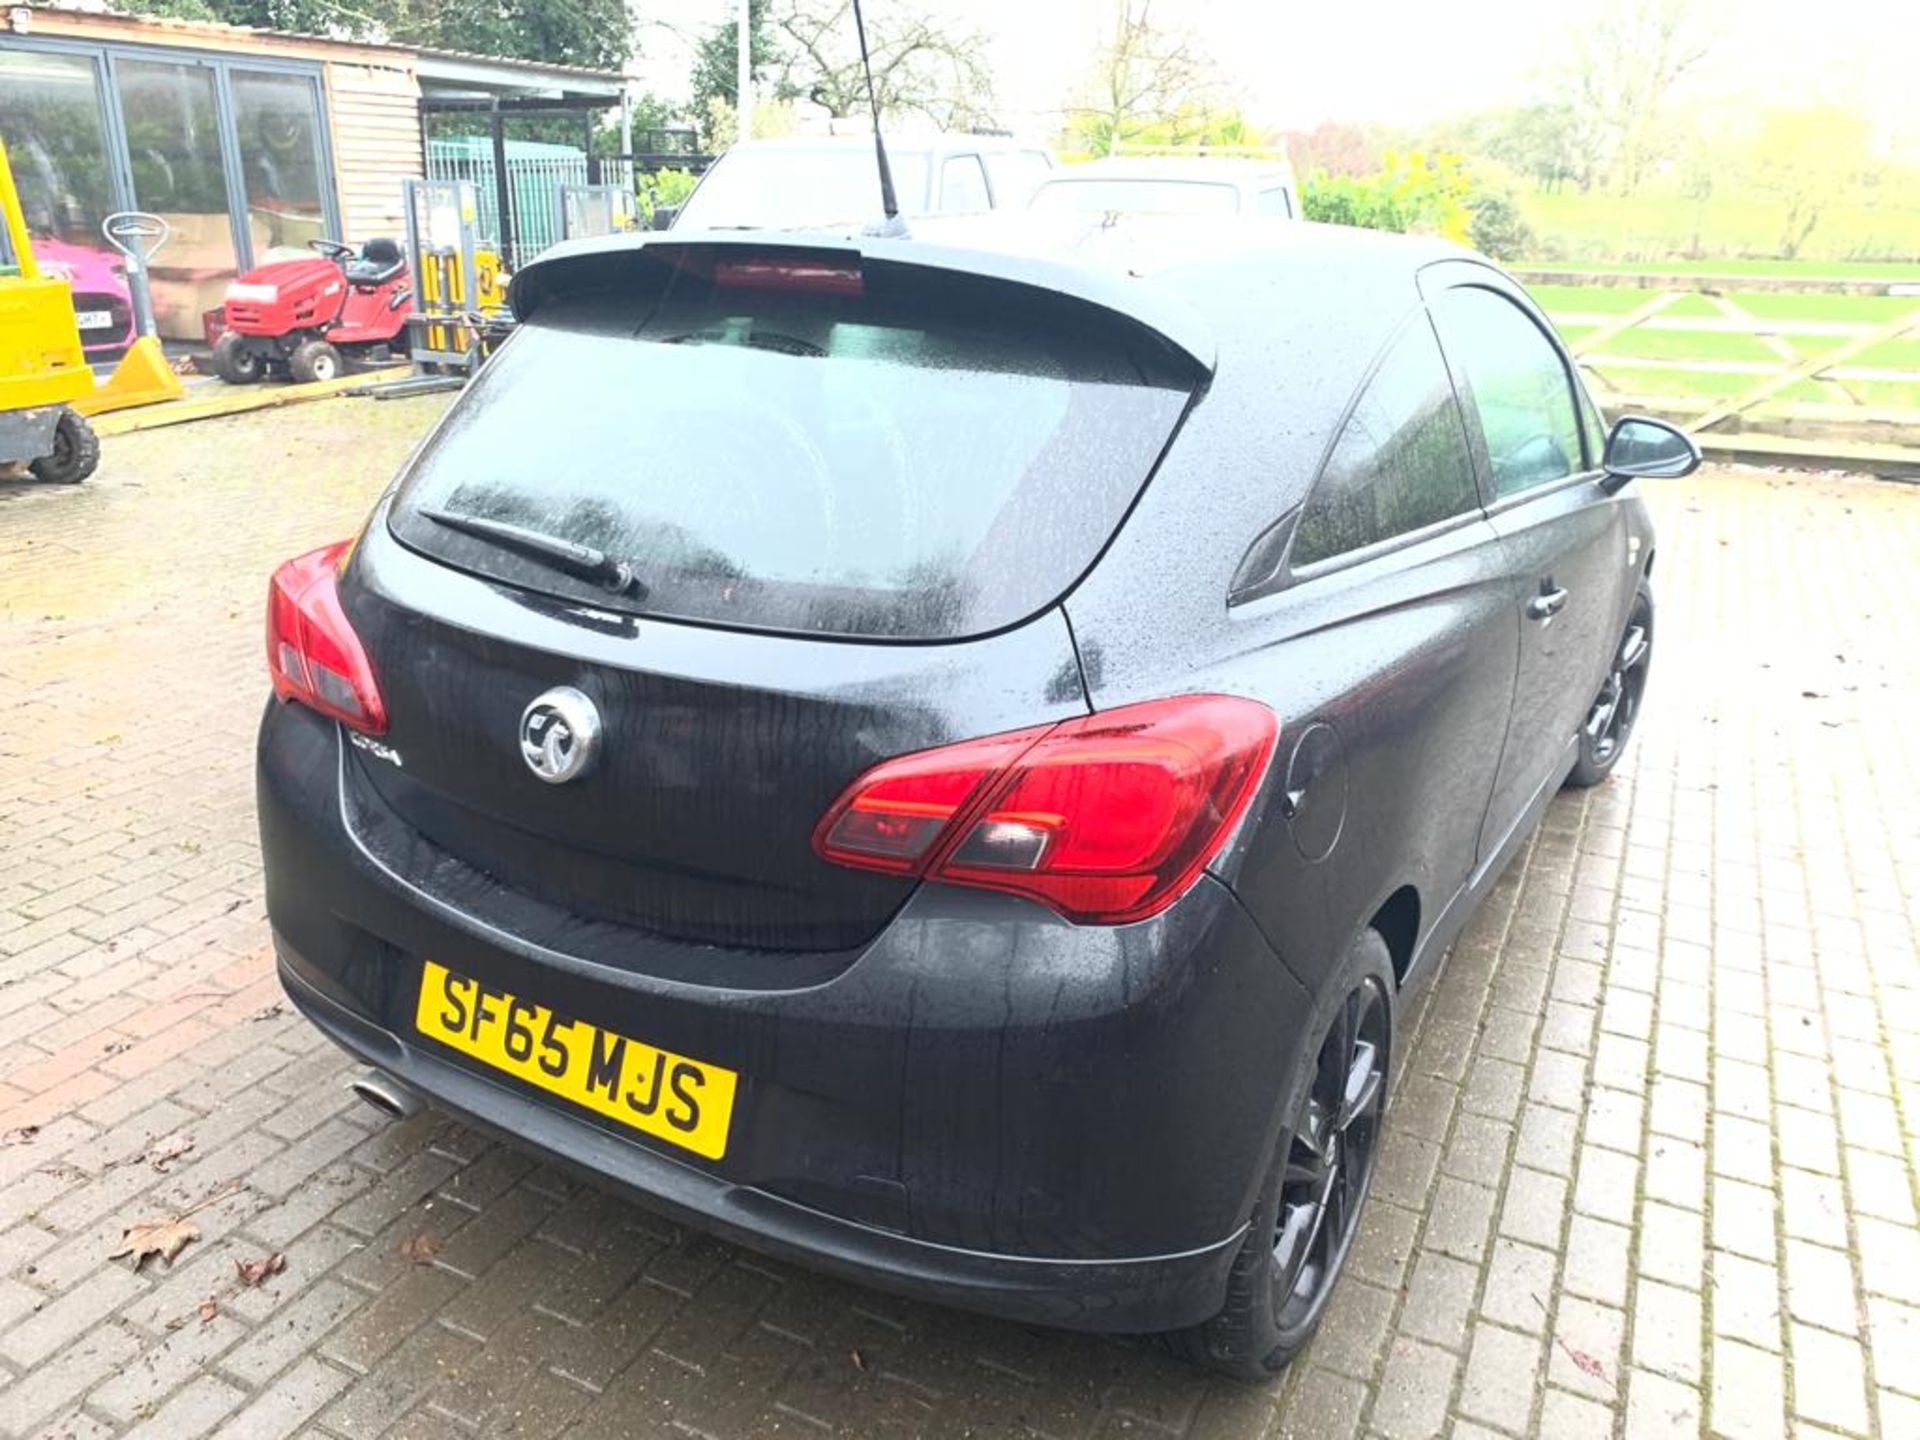 2016/65 REG VAUXHALL CORSA LIMITED EDITION 1.4 PETROL 3 DOOR HATCHBACK, SHOWING 2 FORMER KEEPERS - Image 6 of 16